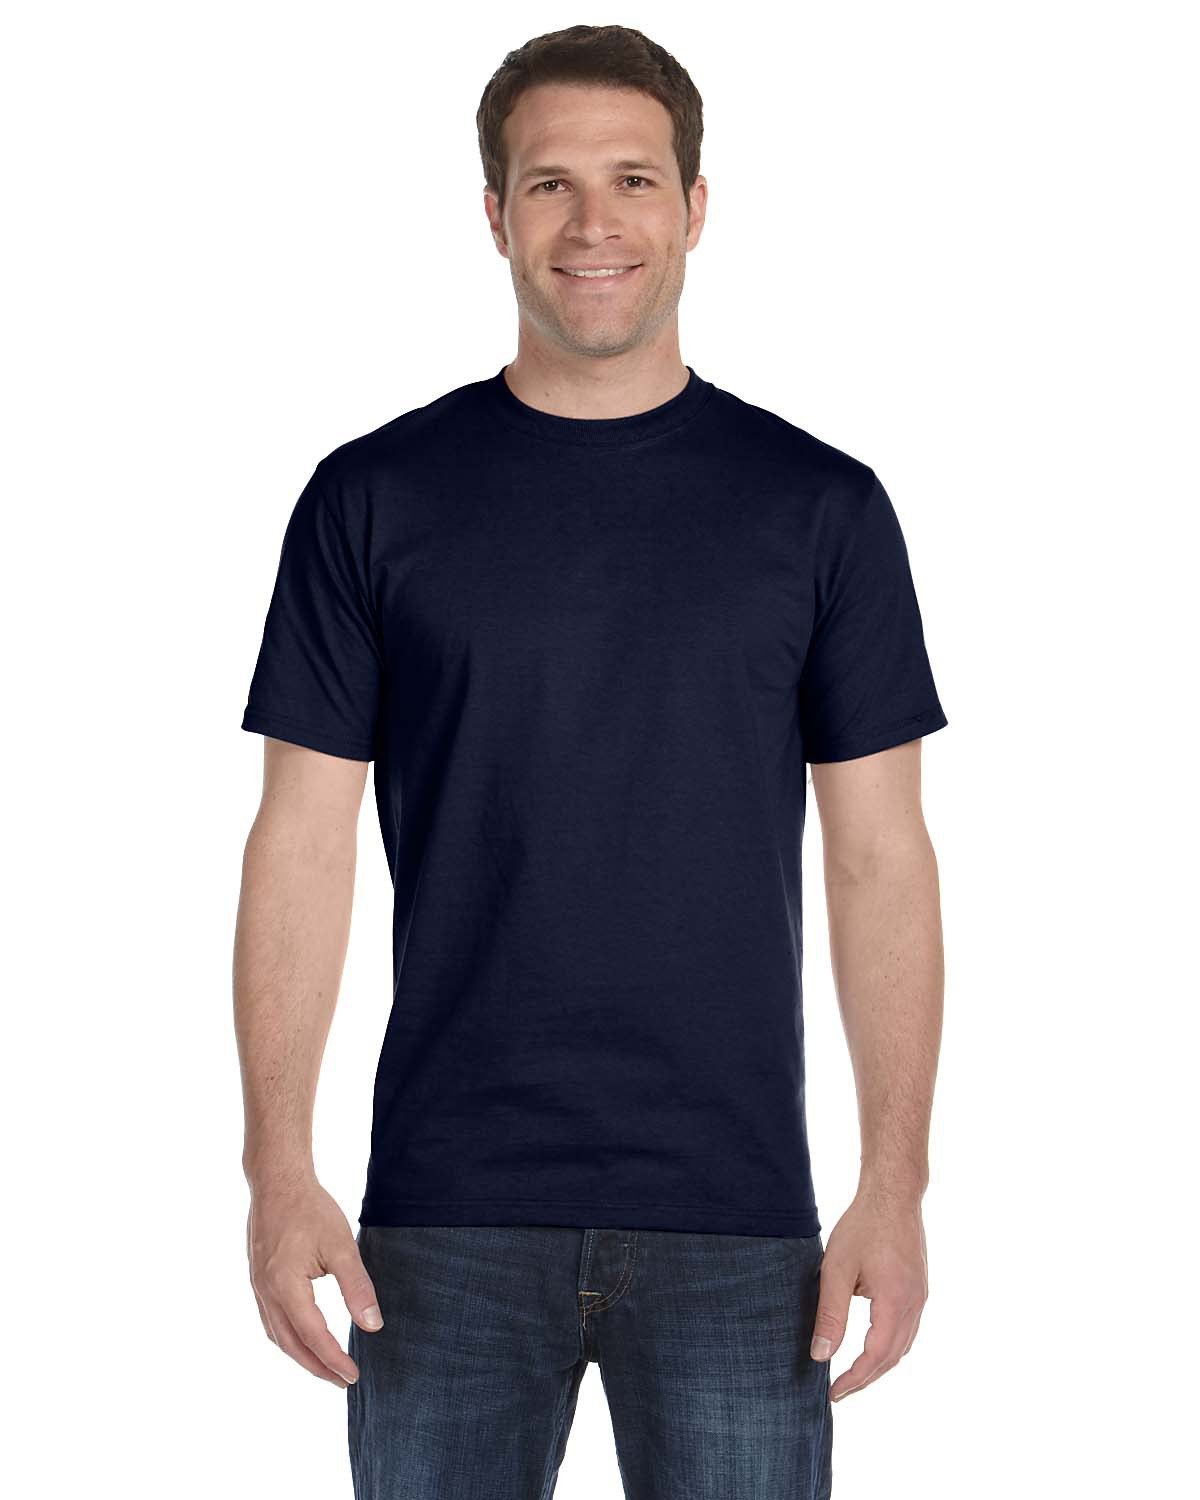 Hanes Adult Essential-T T-Shirt NAVY 